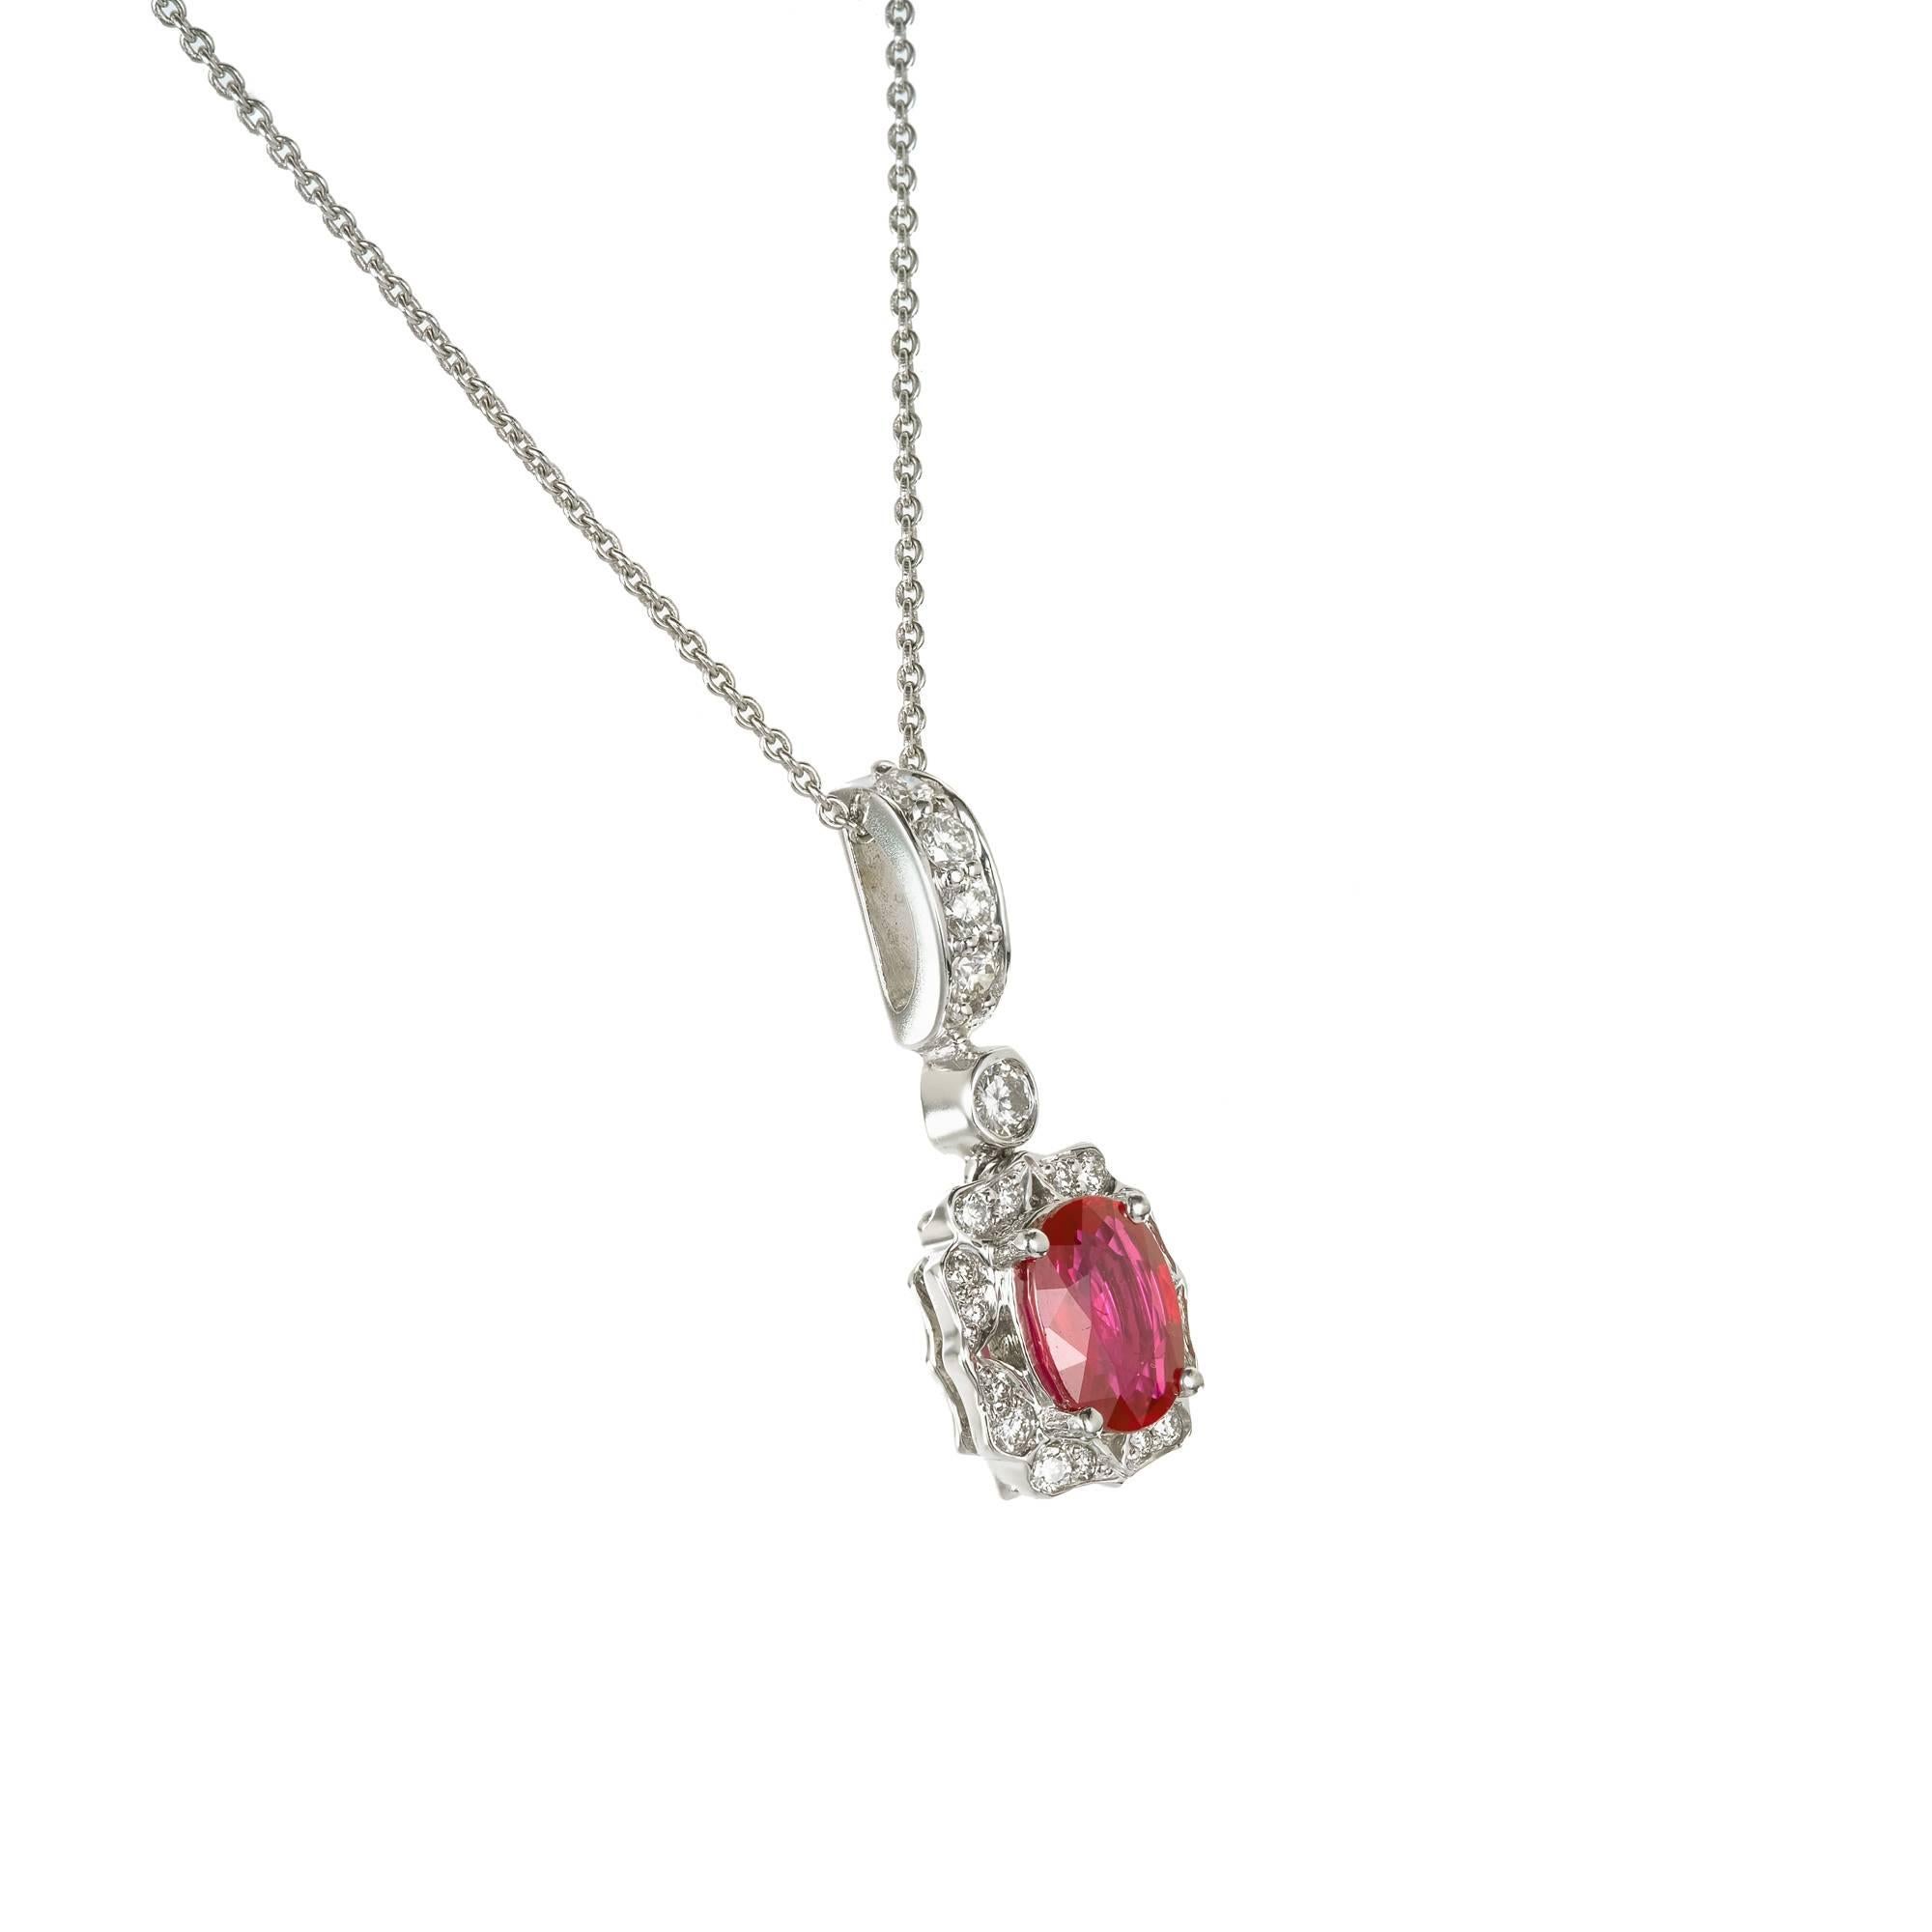 .90 Carat Oval Bright Red Ruby Diamond Gold Pendant Necklace 

1 oval bright red Ruby, approx. total weight .90cts, SI
21 round Diamonds, approx. total weight .25cts, G, VS
18k white gold
4.1 grams
Tested and stamped: 18k
Hallmark: Err Top to